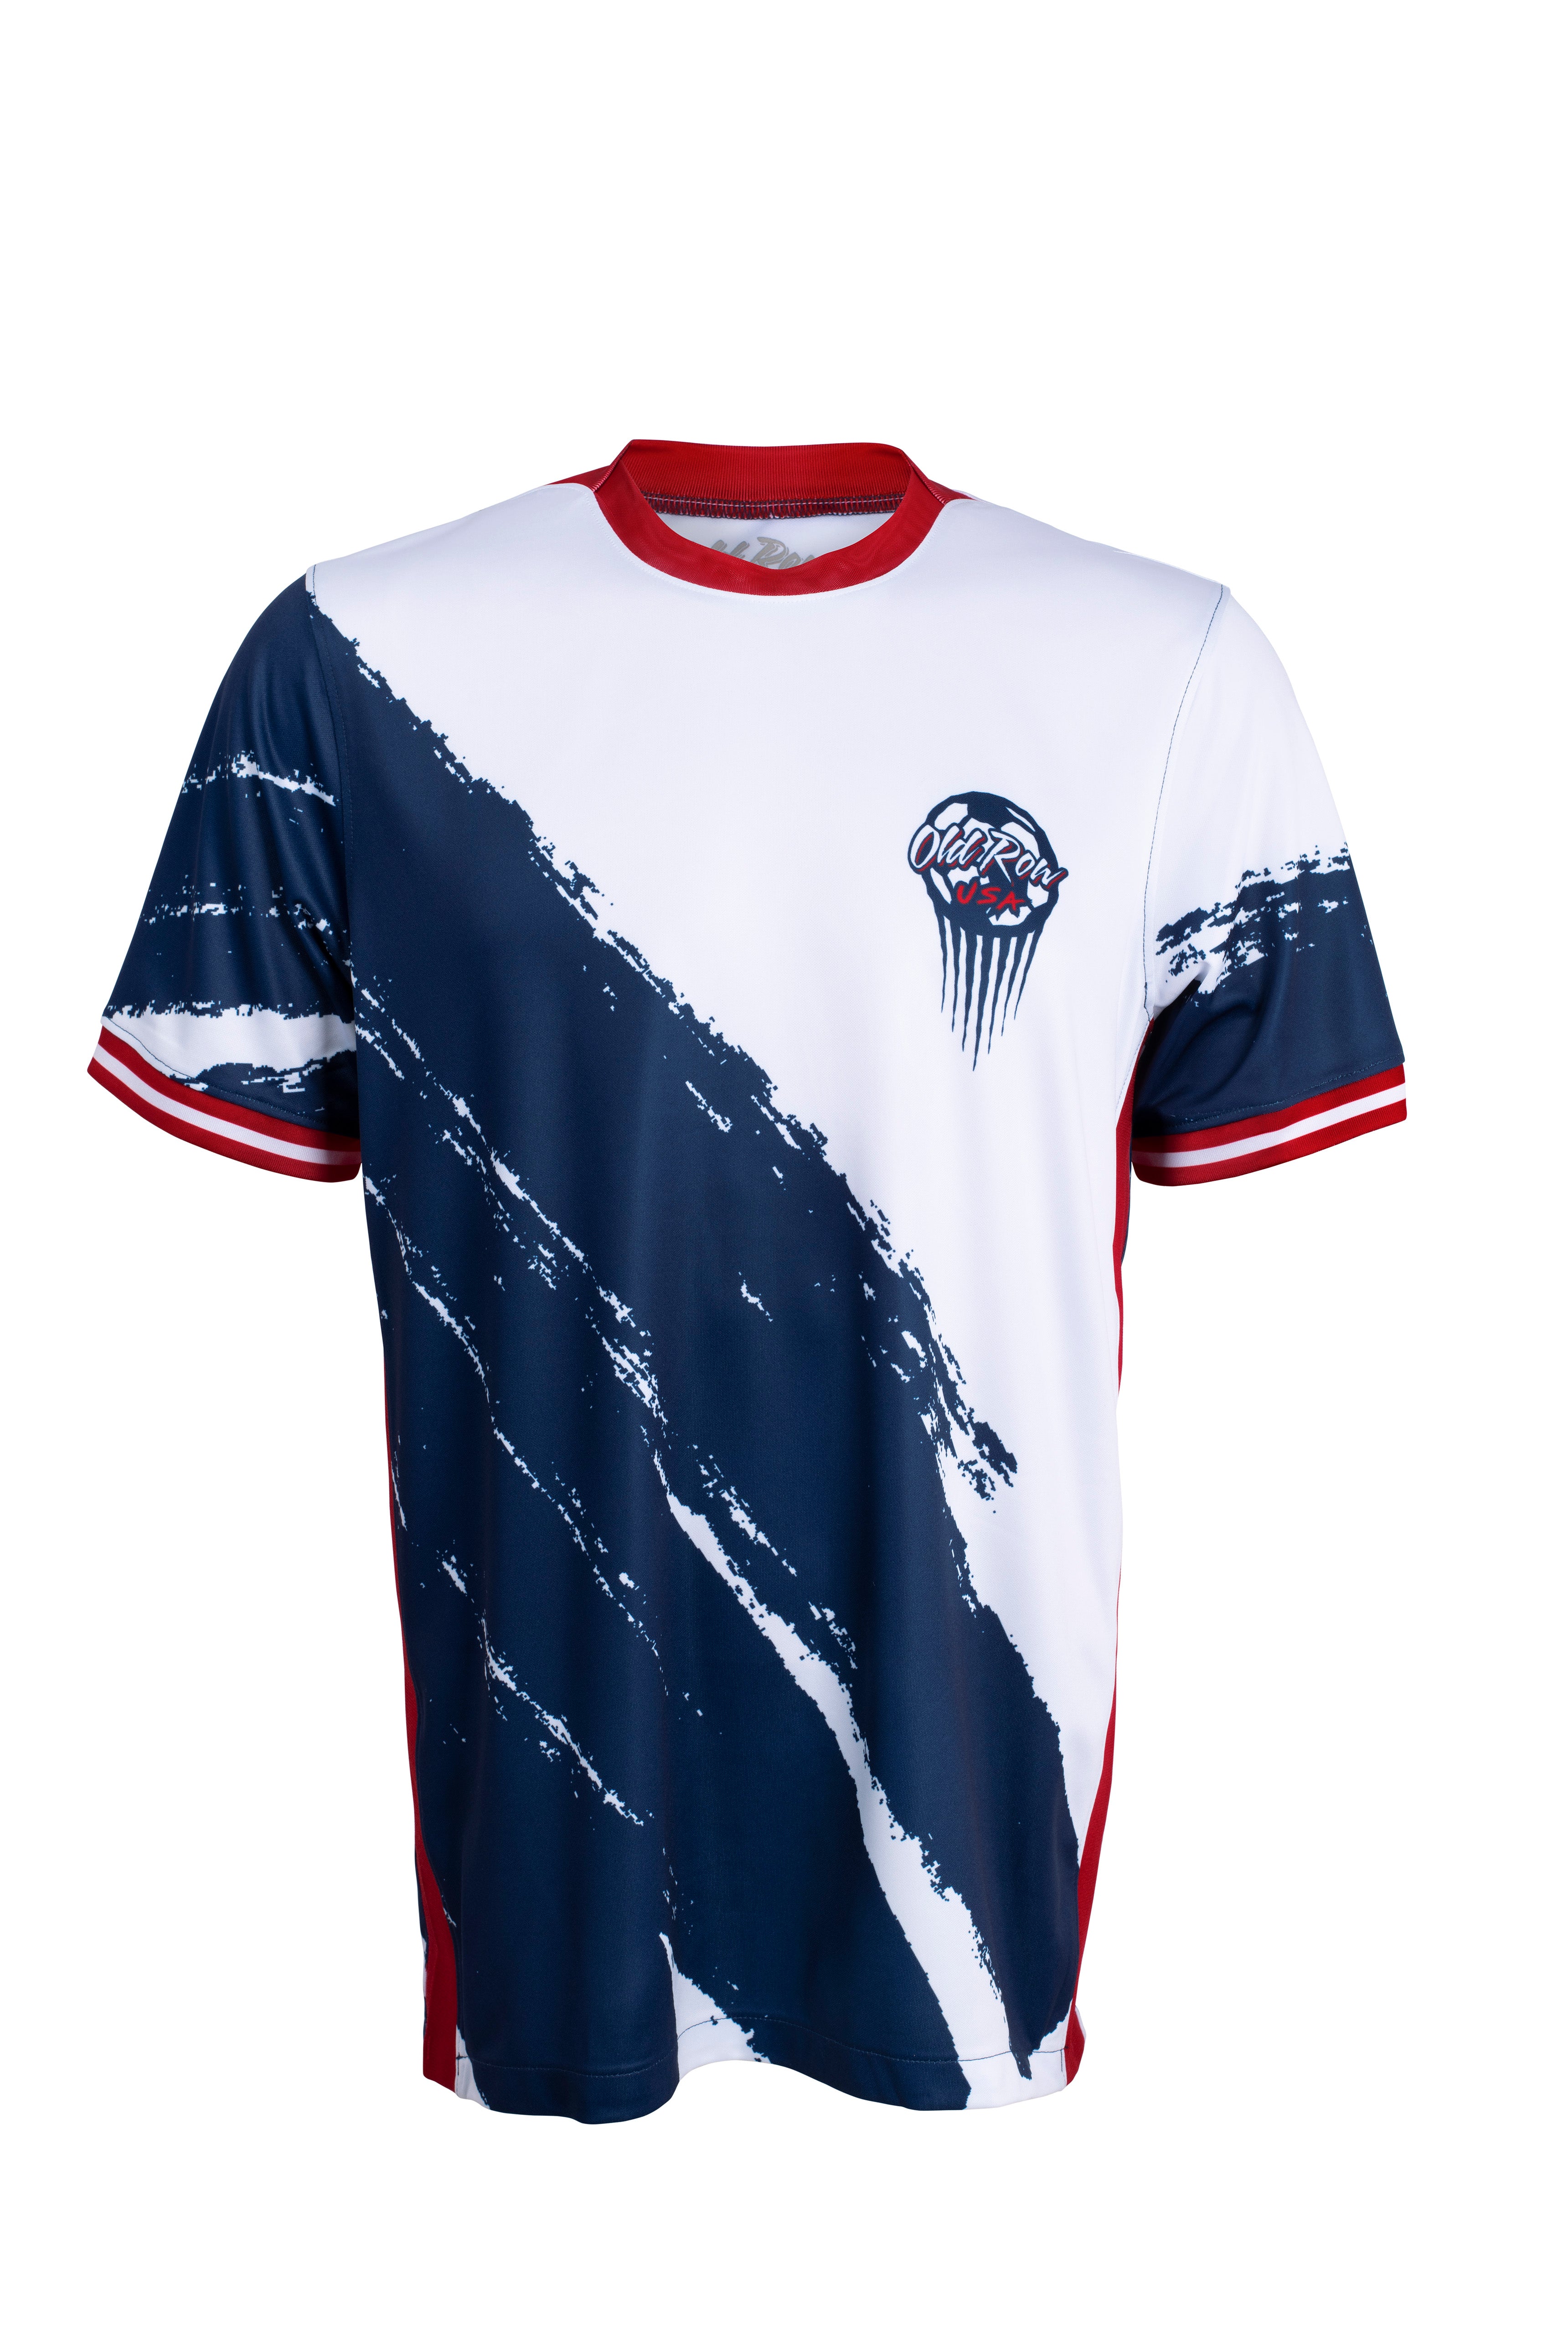 Old Row Soccer Vintage Jersey - Old Row Shirts, Clothing & Merch